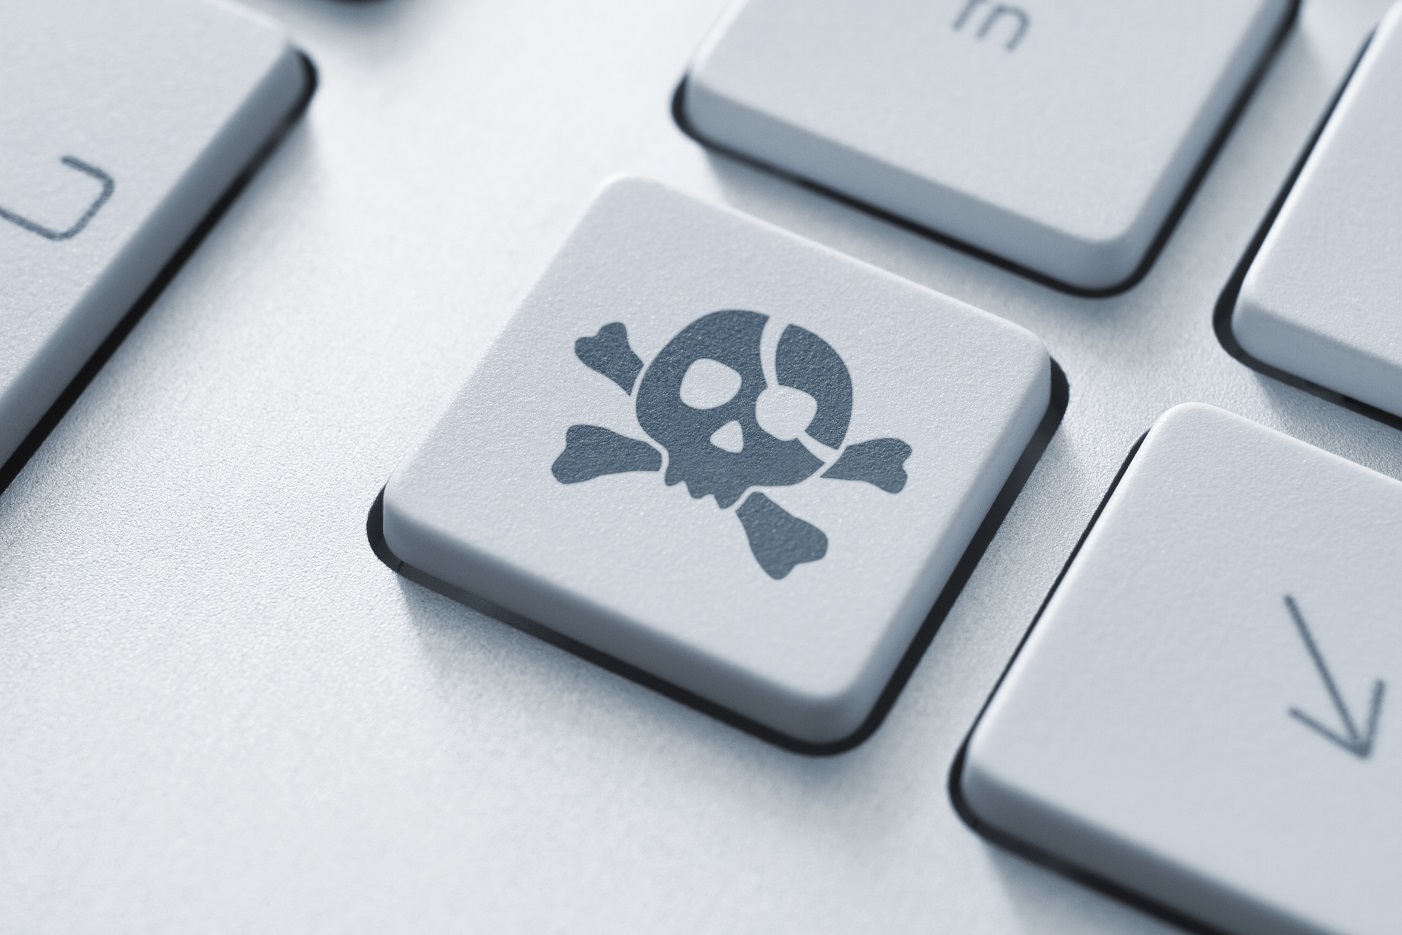 US Government Fined $50 Million For Pirating Software